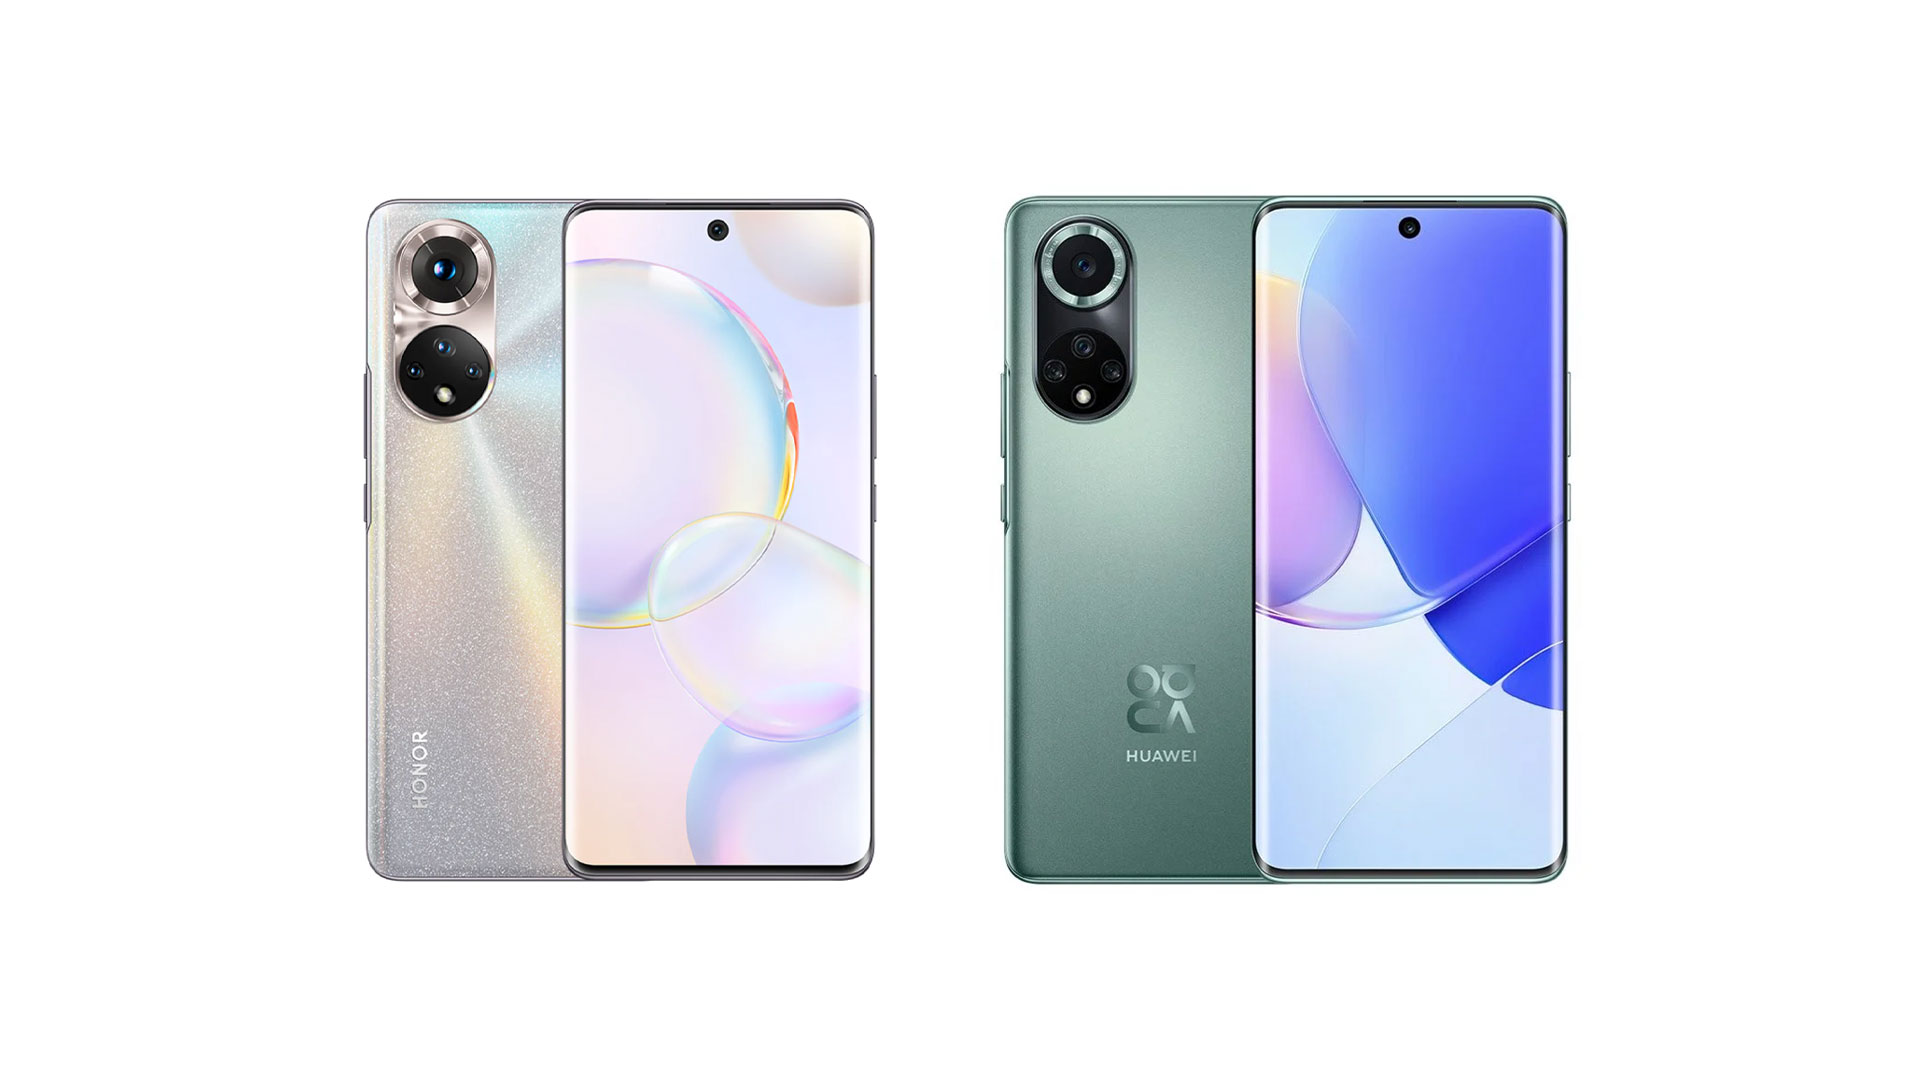 hop Wordt erger Ik heb een Engelse les Are Honor 50 and Huawei Nova 9 clones? The company answers - GizChina.it